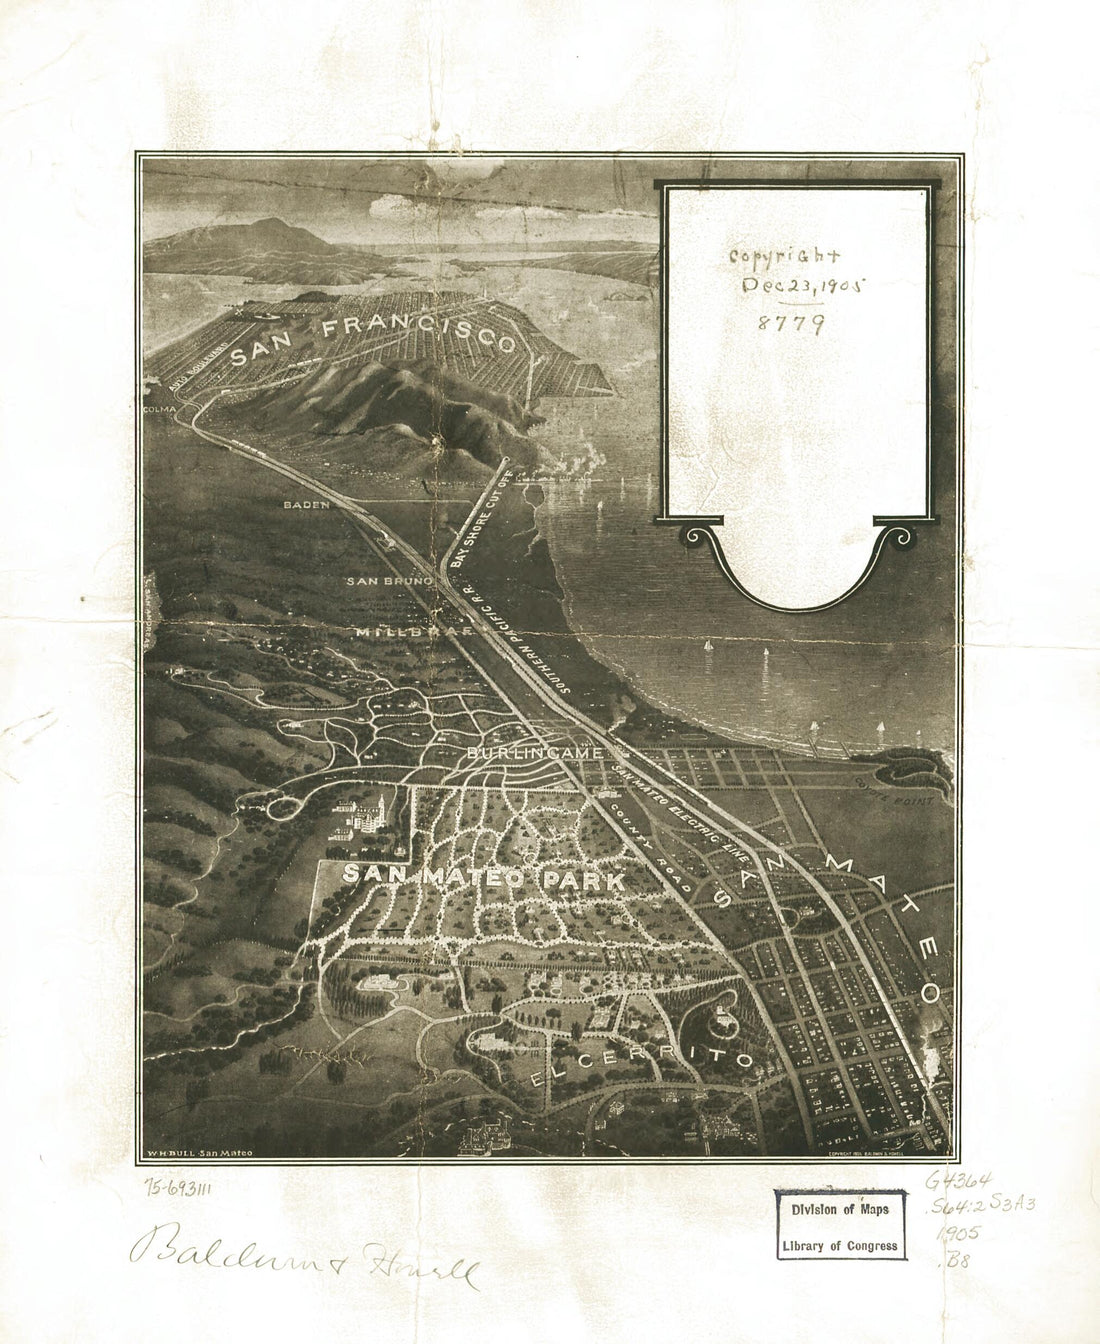 This old map of San Mateo Park from 1905 was created by  Baldwin &amp; Howell, William H. Bull in 1905